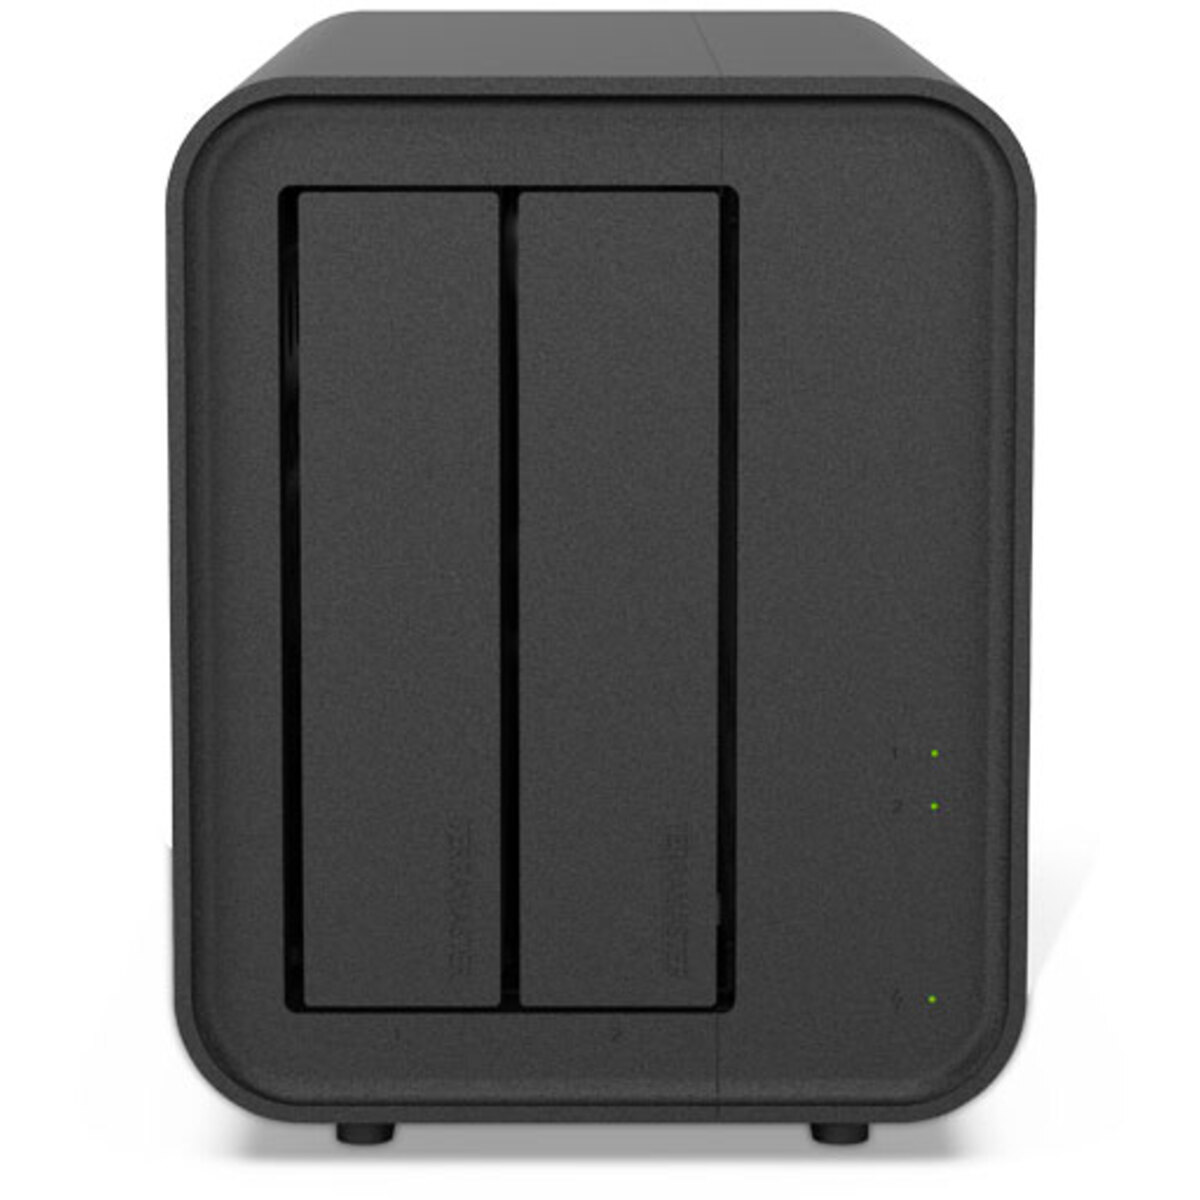 TerraMaster D5 Hybrid 20tb 2-Bay Desktop Multimedia / Power User / Business DAS - Direct Attached Storage Device 2x10tb Seagate EXOS X18 ST10000NM018G 3.5 7200rpm SATA 6Gb/s HDD ENTERPRISE Class Drives Installed - Burn-In Tested D5 Hybrid